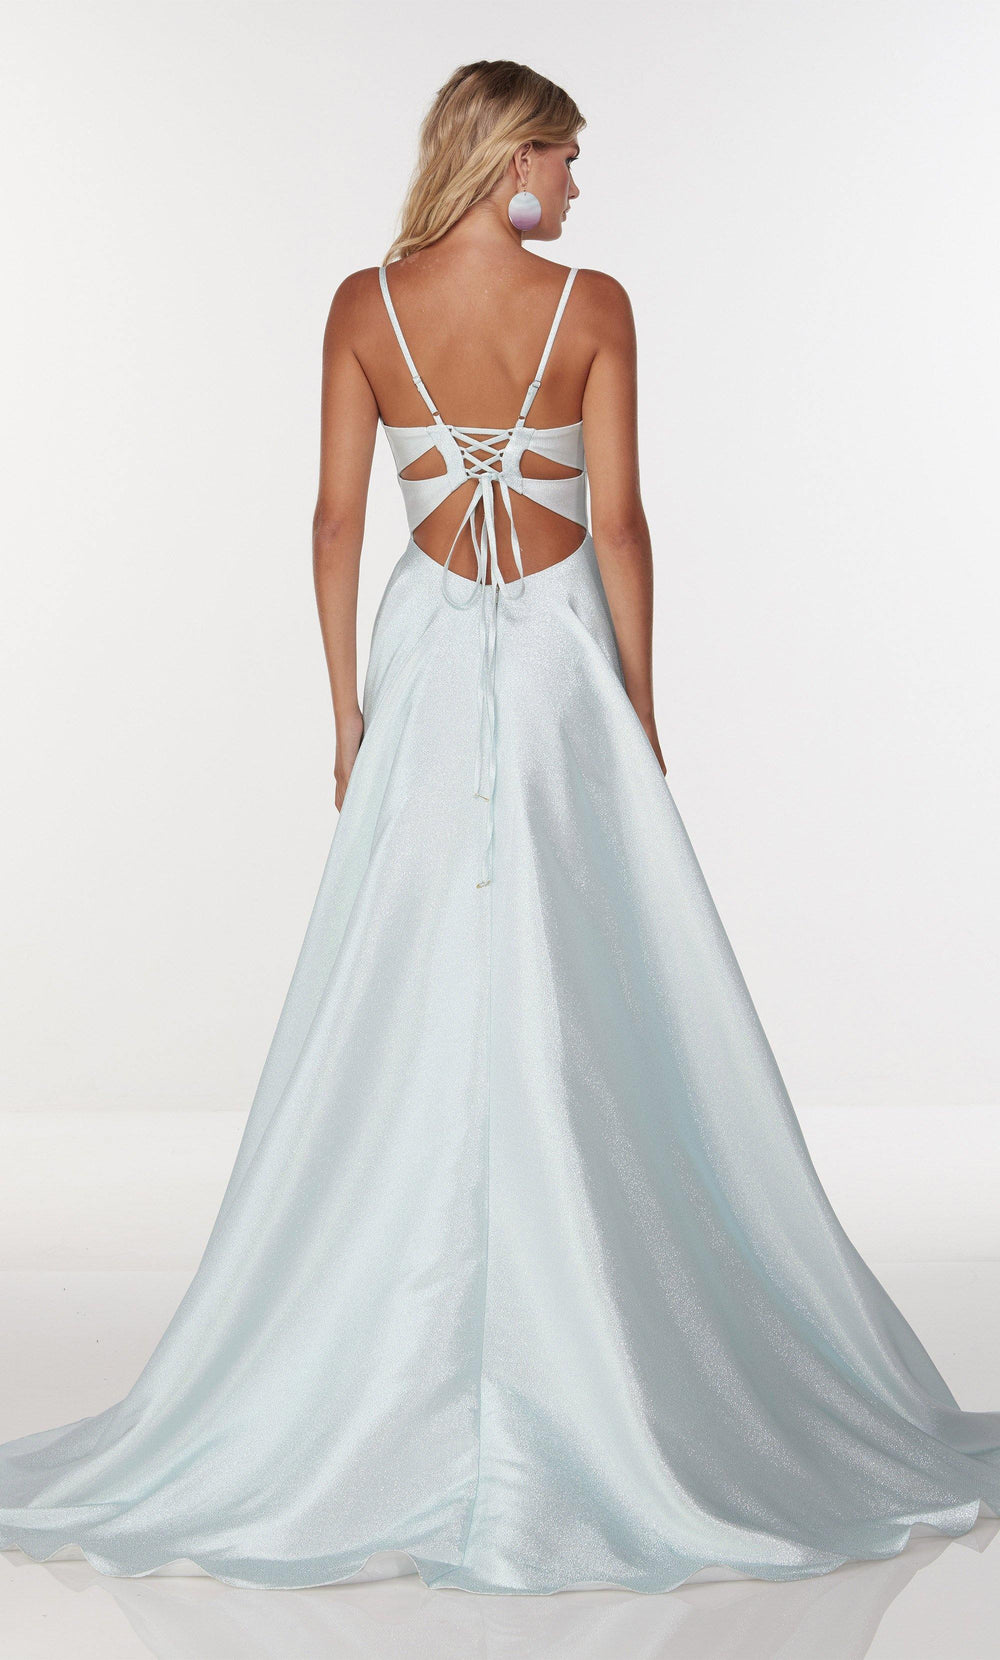 Formal Dress: 7055. Long, Strapless, Mermaid, Lace-up Back